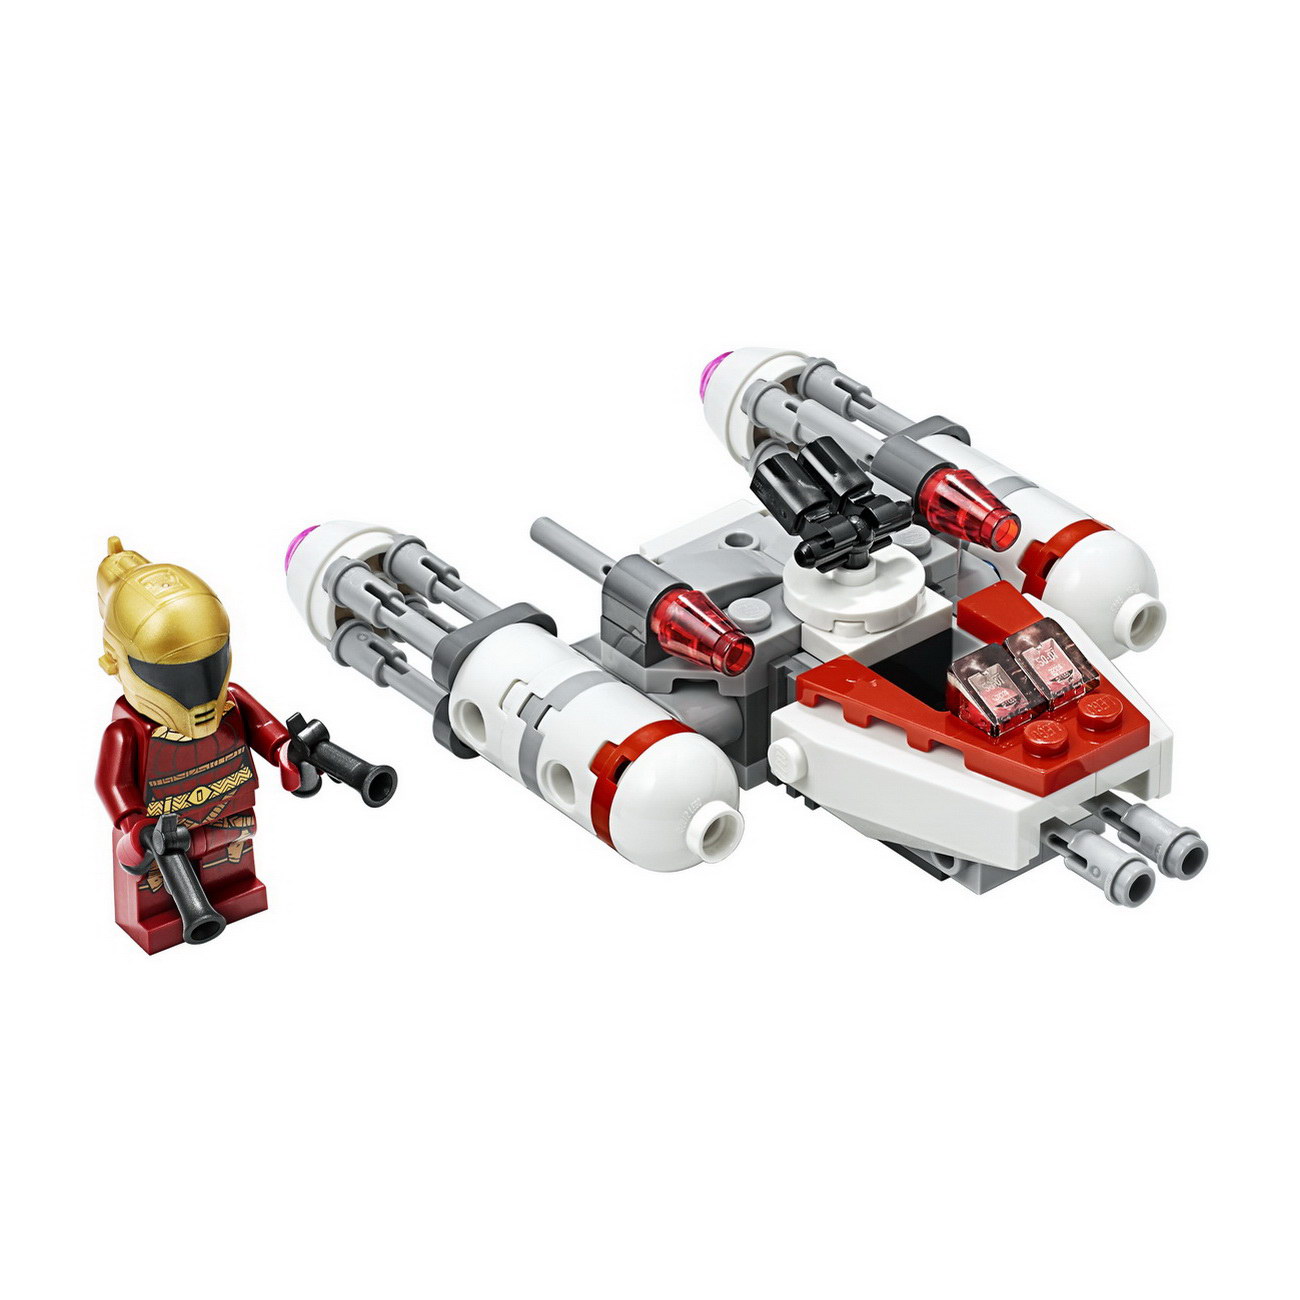 LEGO Star Wars - Widerstands Y-Wing Microfighter (75263)